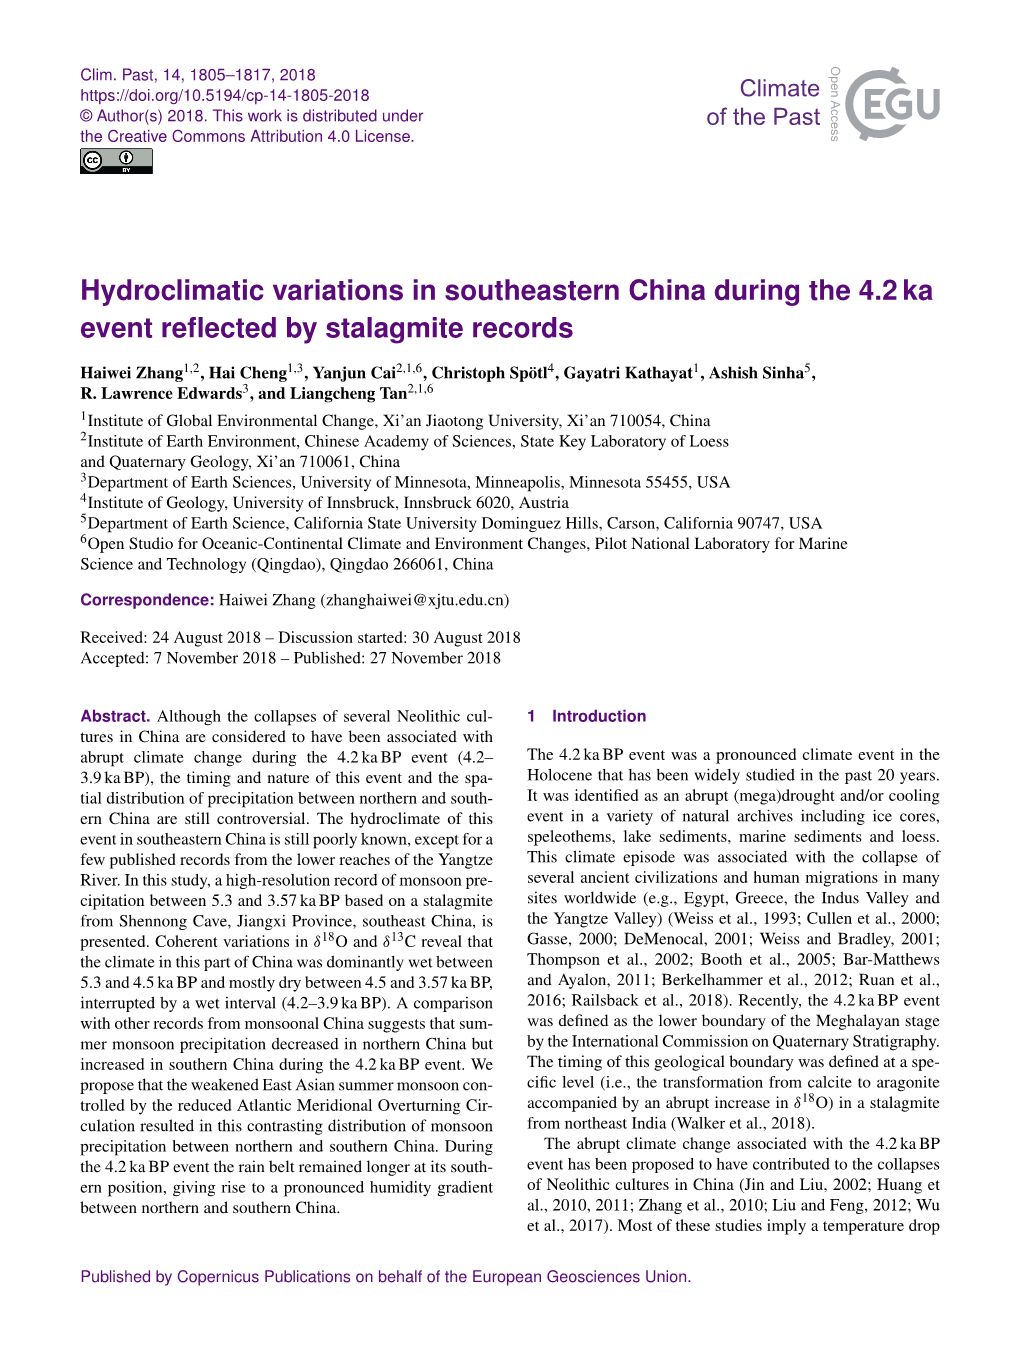 Hydroclimatic Variations in Southeastern China During the 4.2 Ka Event Reﬂected by Stalagmite Records